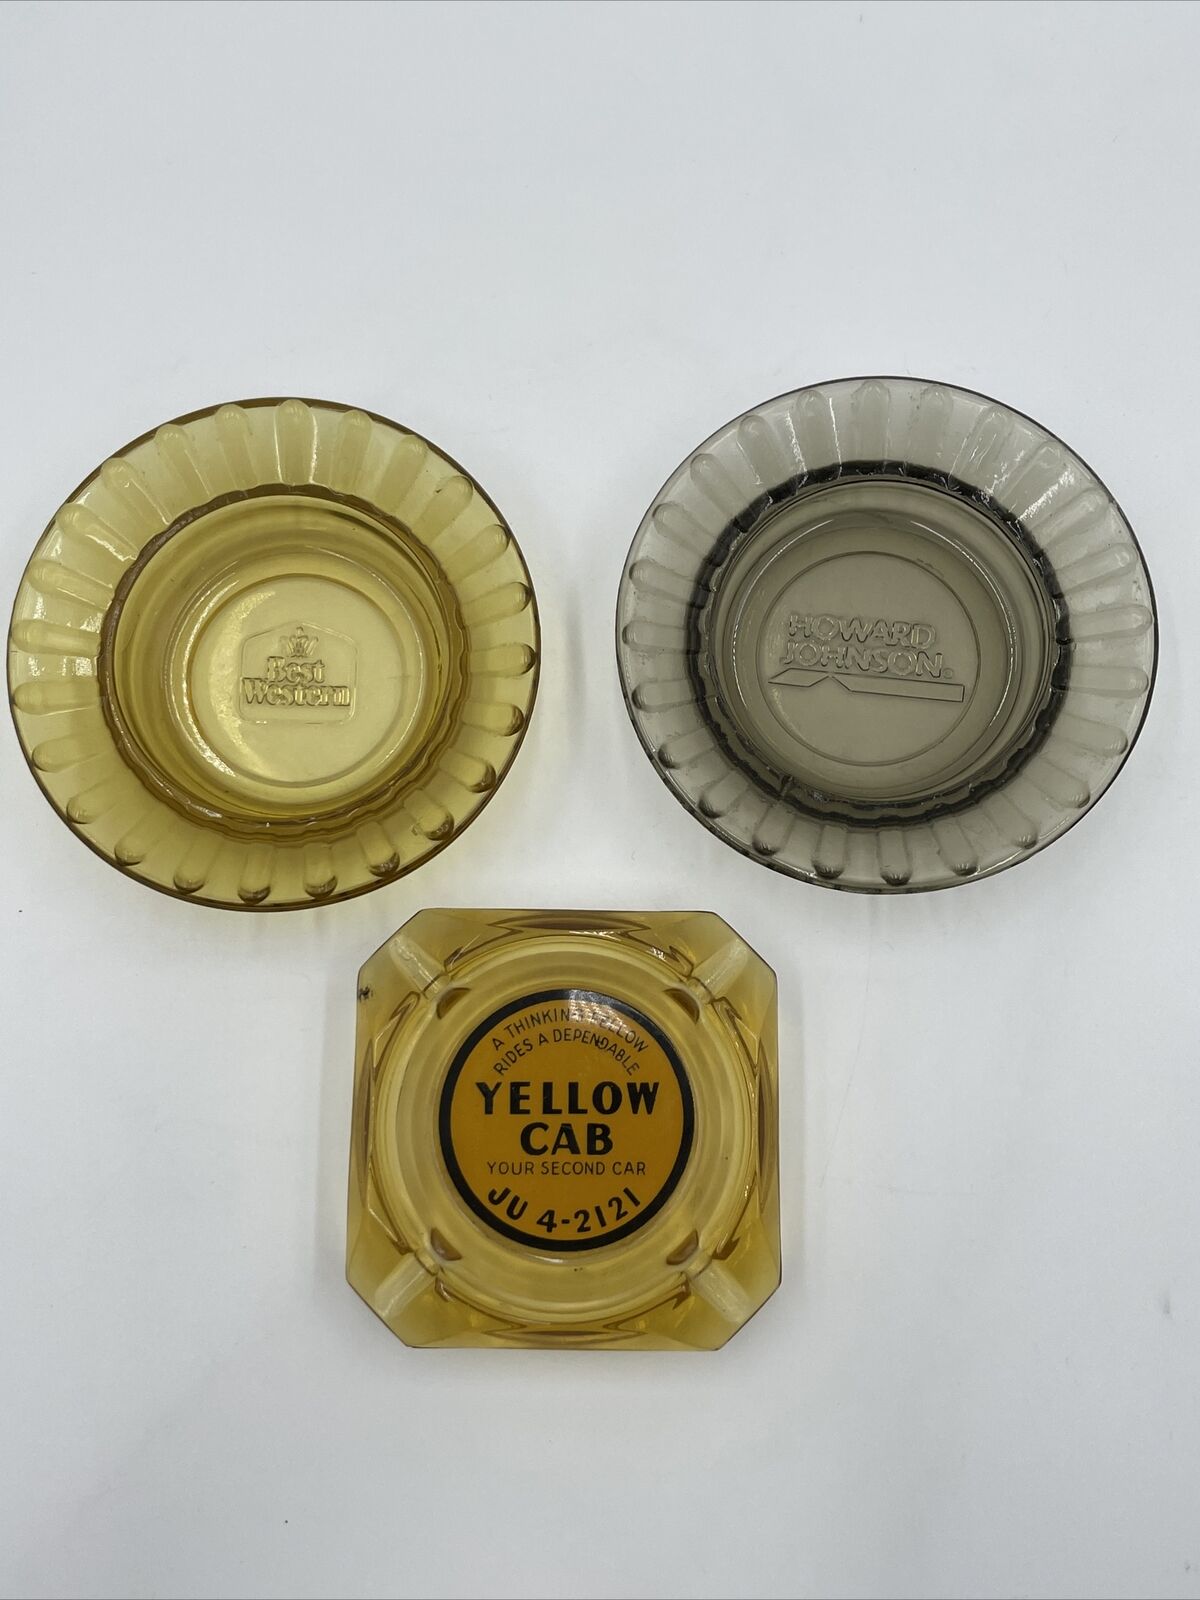 3 Vintage Ashtray Advertising Souvenir Yellow Cab Amber Glass Best Western Hotel